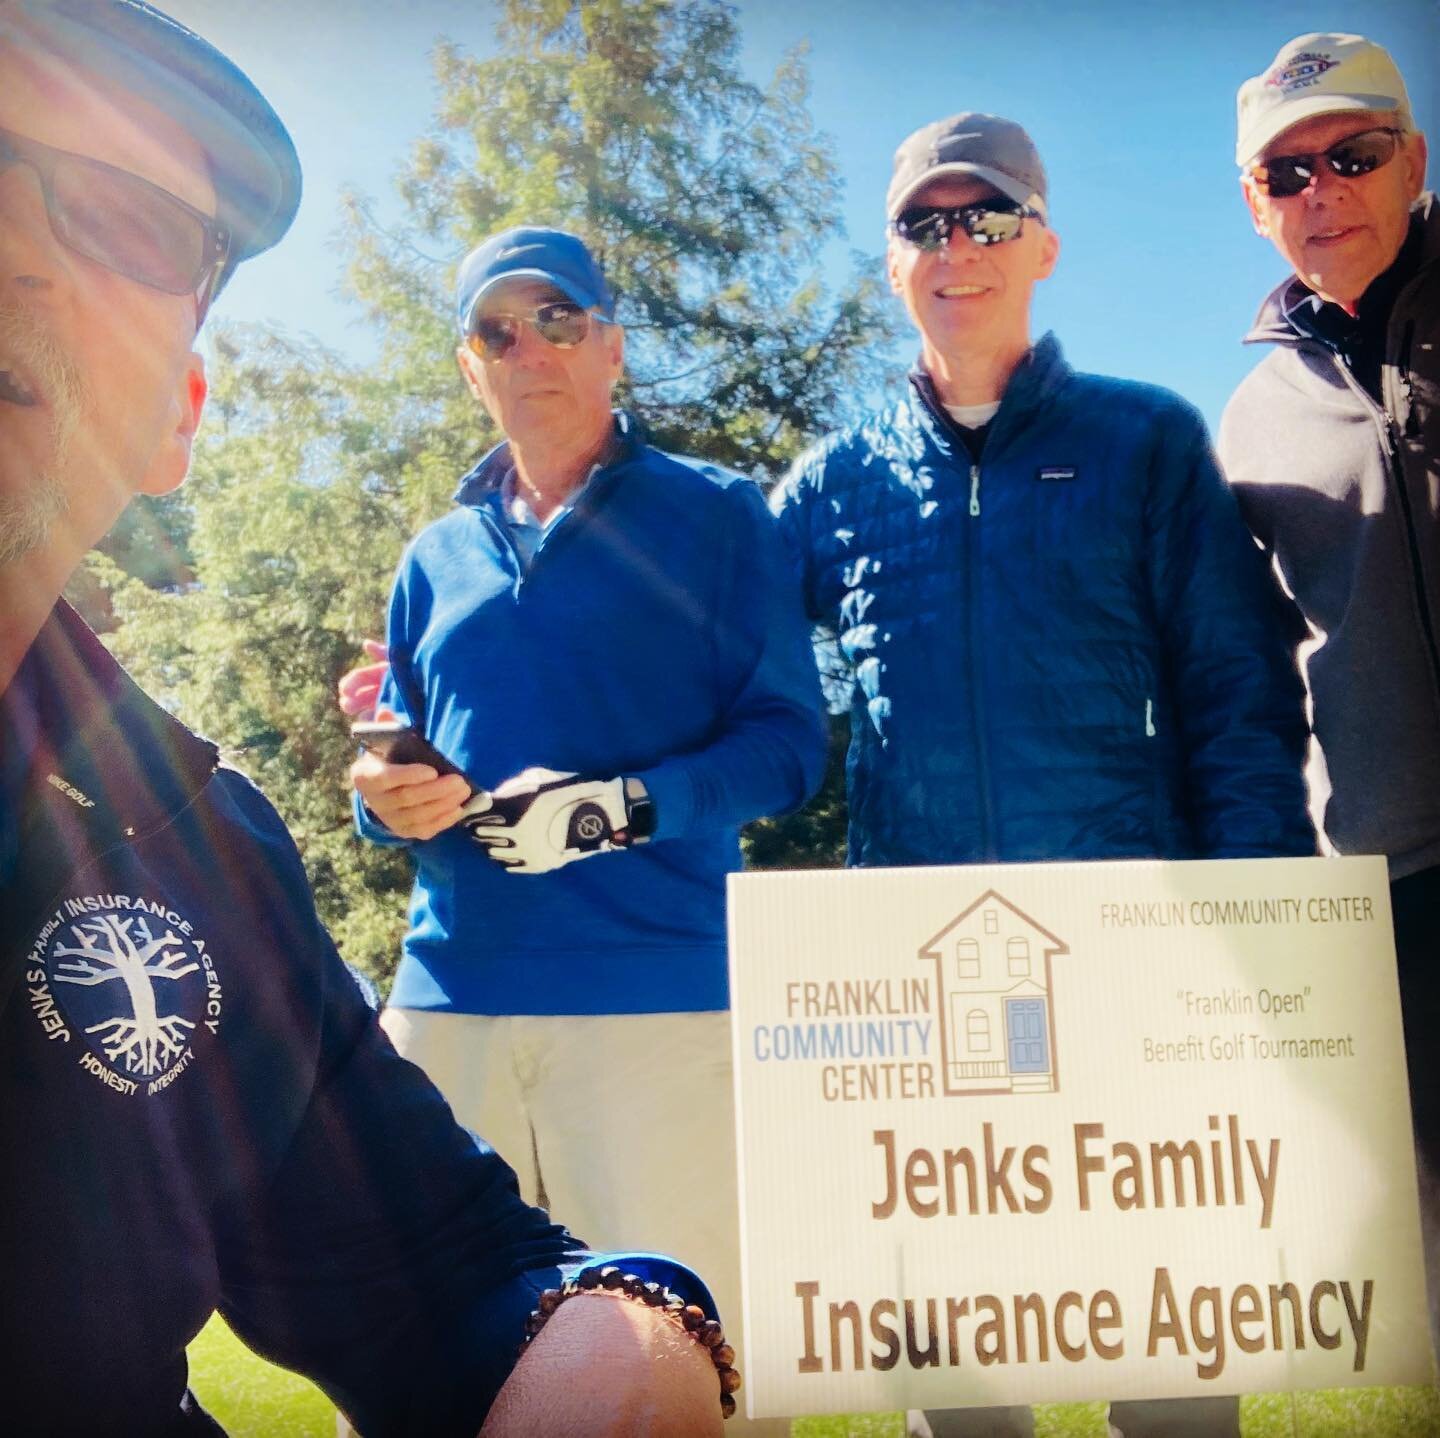 Great day on the links helping to support Franklin Community Center.. Doing what we can and enjoying every minute of it!! Thank  You to our friends who make it all happen at Franklin Community Ctr #jenksfamilyinsurance #franklincommunitycenter